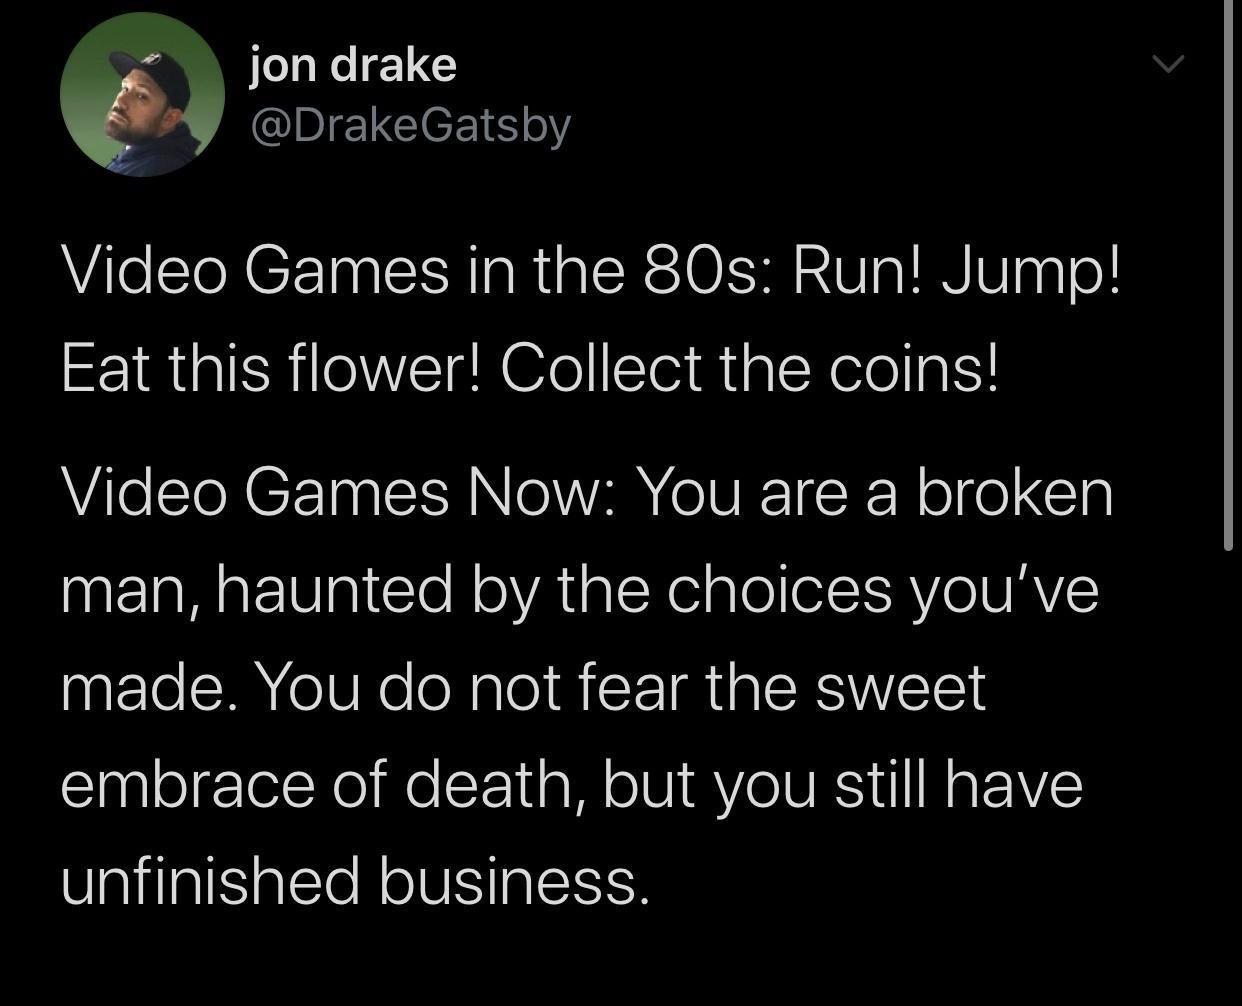 live streaming funny memes - jon drake Video Games in the 80s Run! Jump! Eat this flower! Collect the coins! Video Games Now You are a broken man, haunted by the choices you've made. You do not fear the sweet embrace of death, but you still have unfinishe